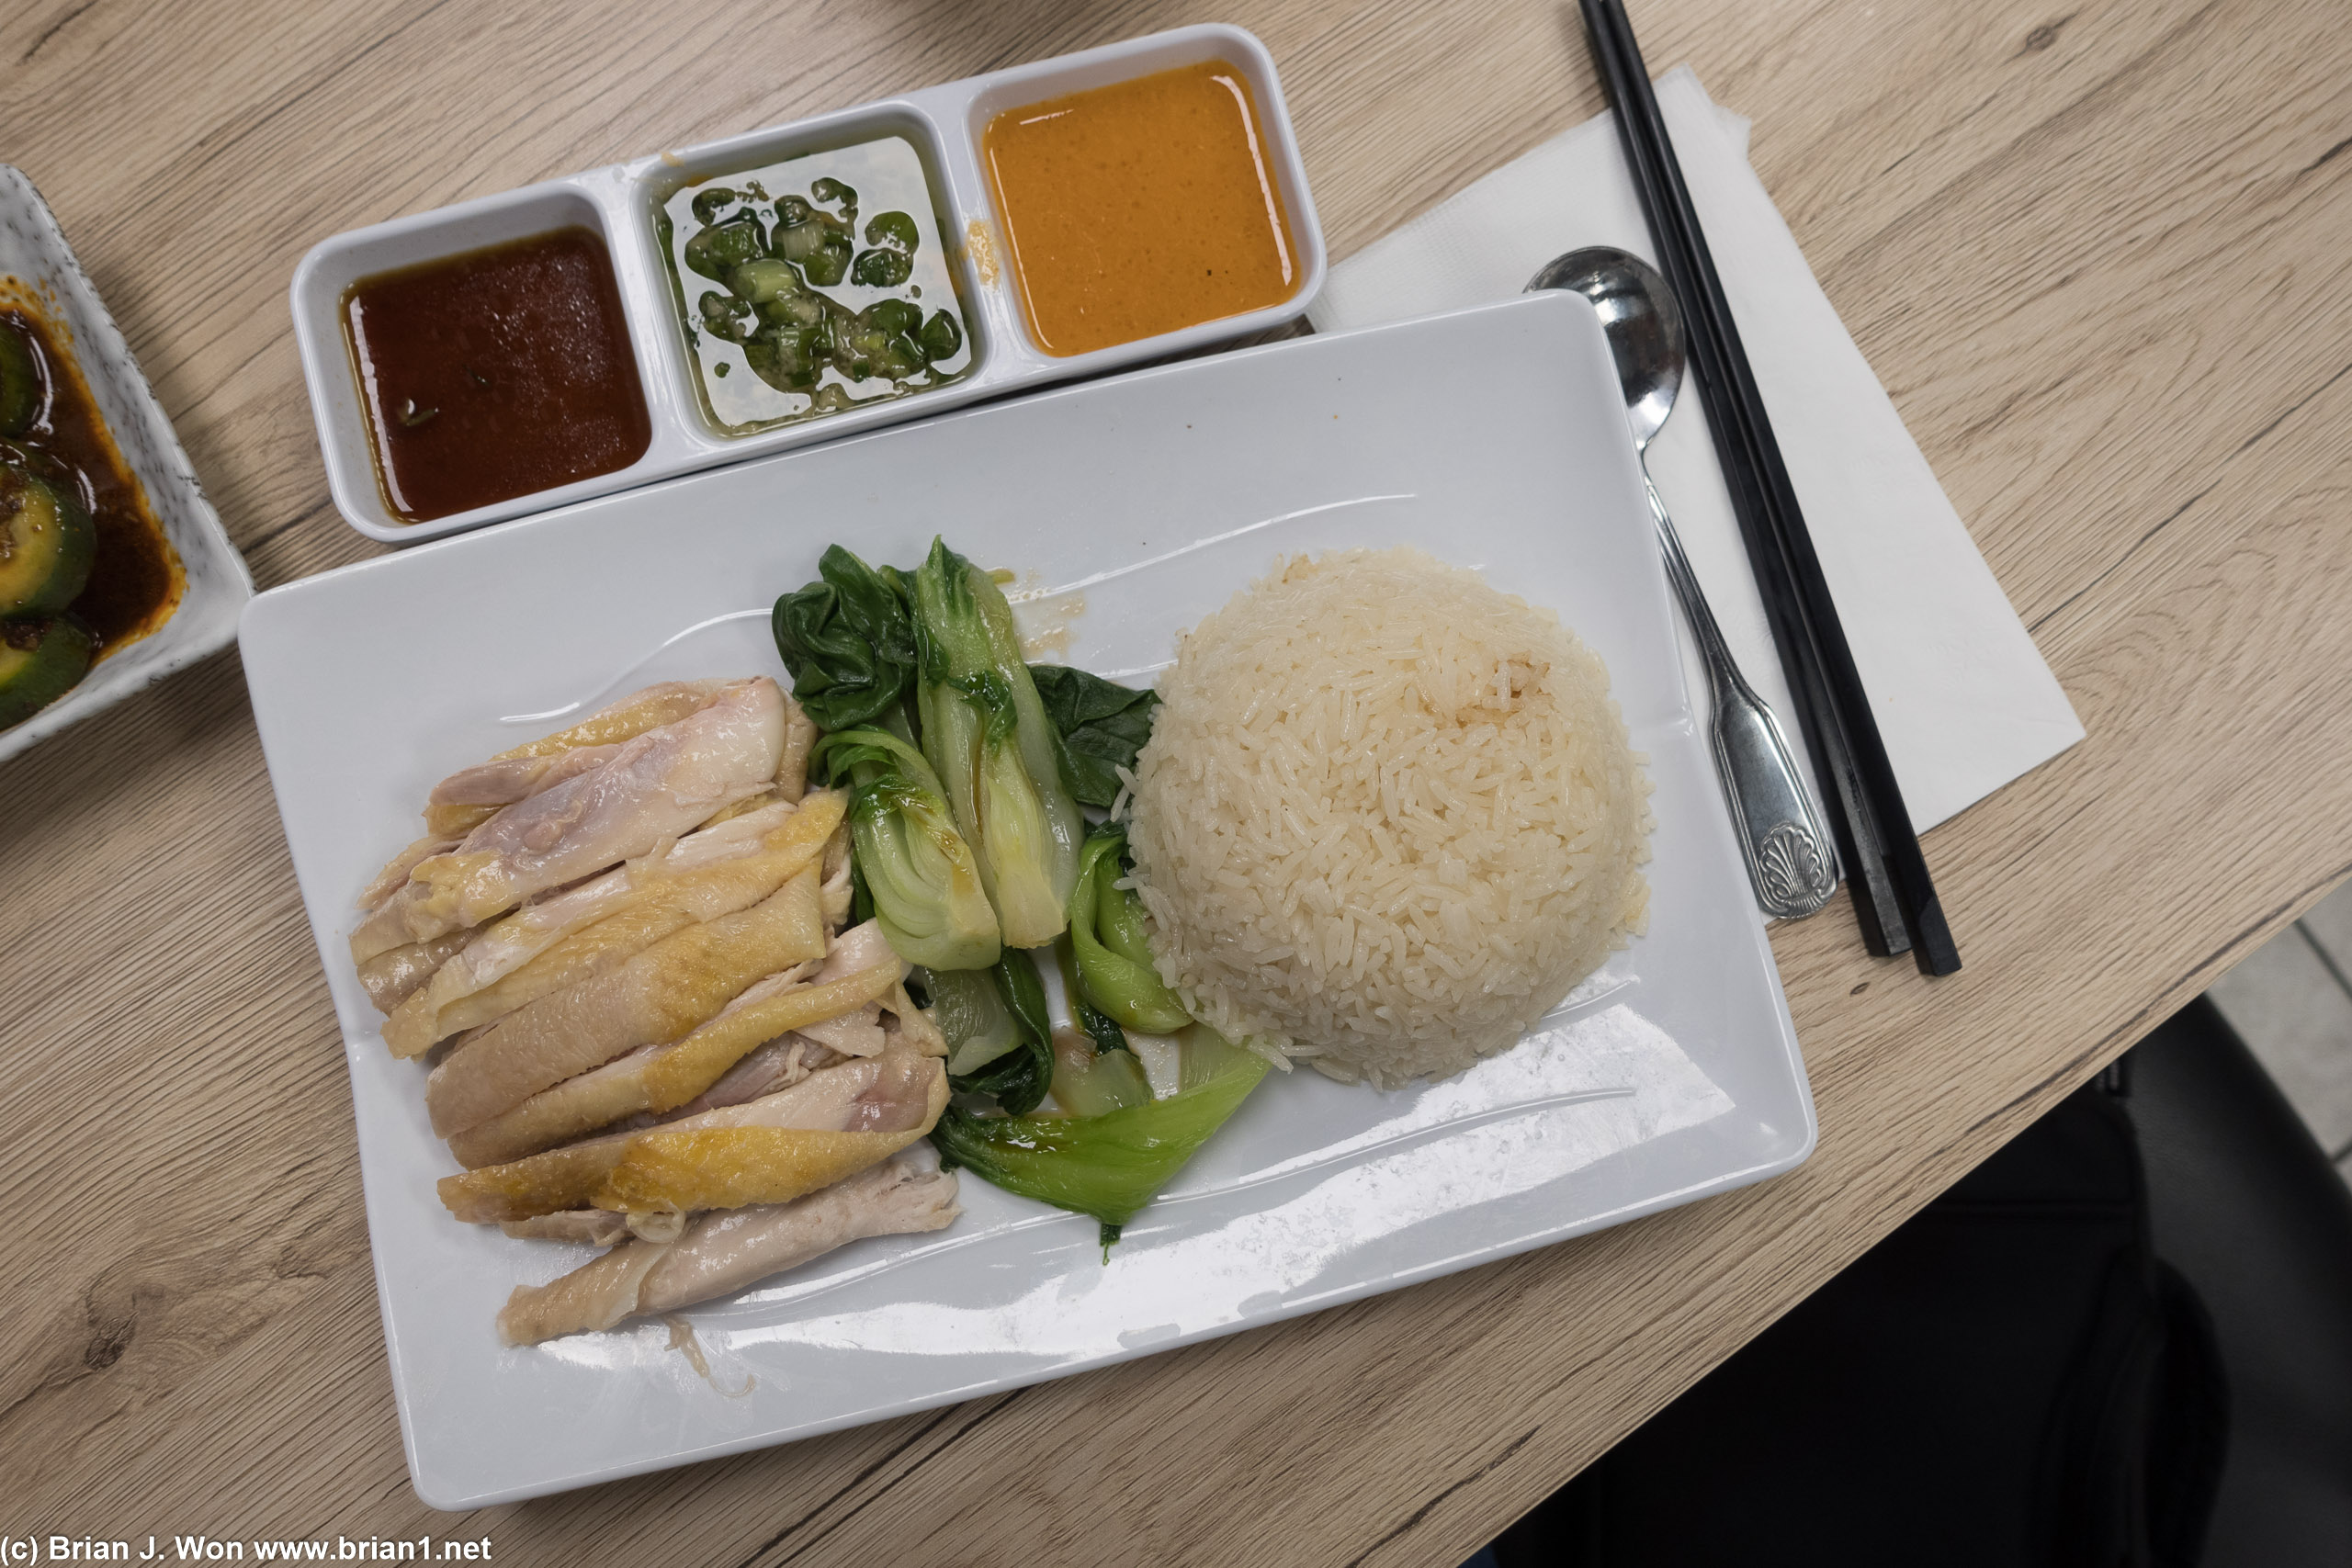 Hainan chicken was okay but lacked the umami of their better competitors.